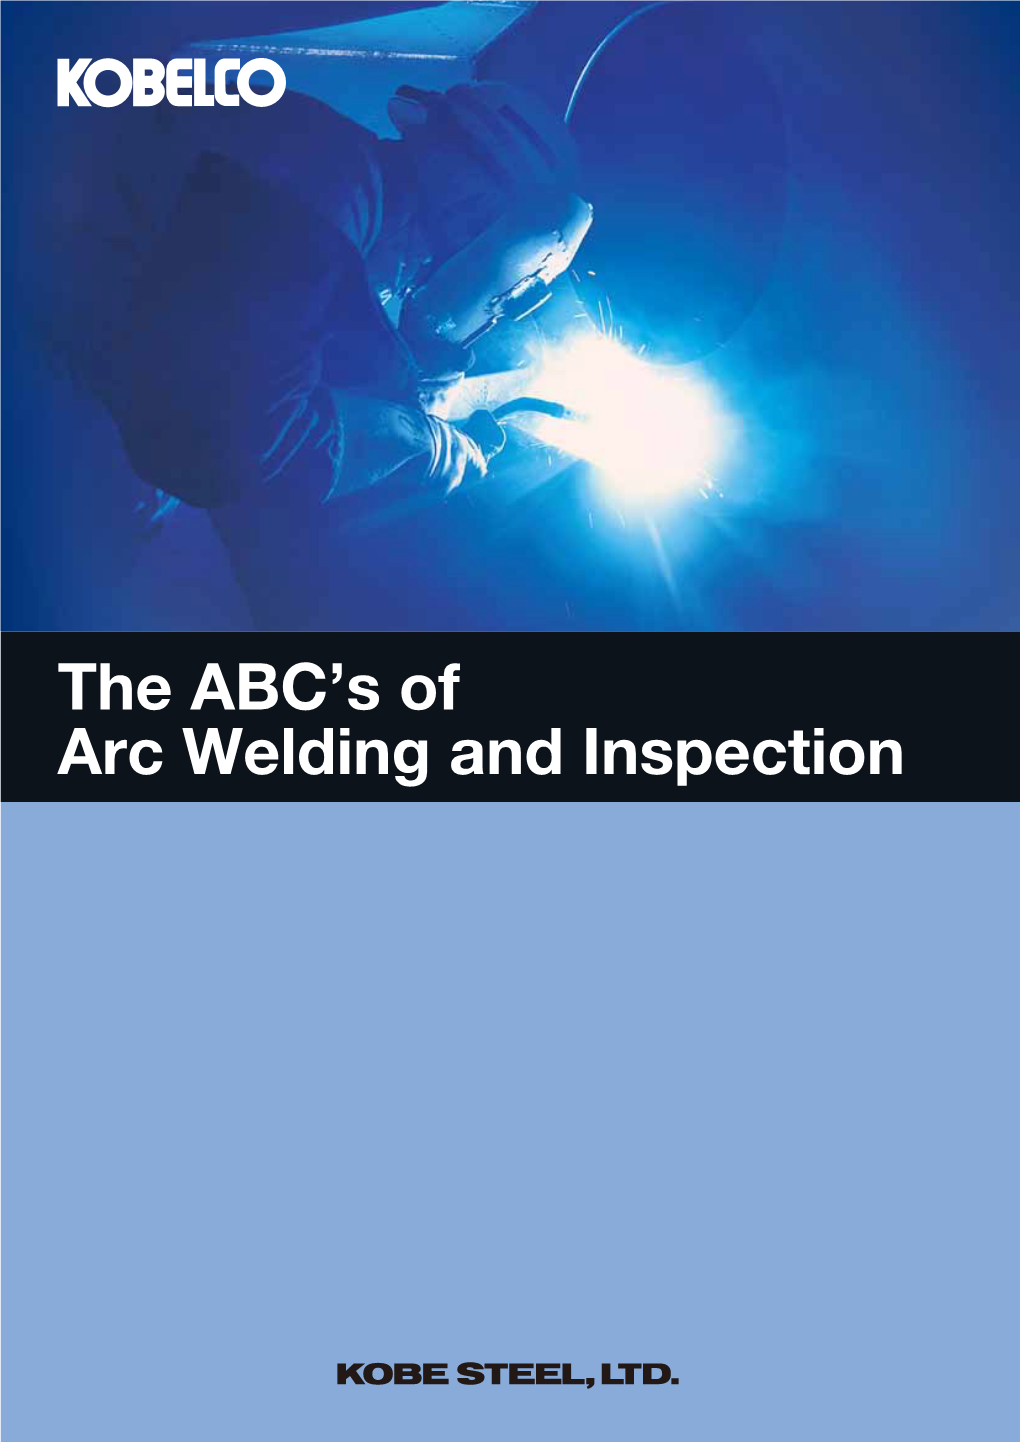 The ABC's of Arc Welding and Inspection Has Been Published As a Textbook for Beginners Who Study the Fundamentals of Welding Technology and Inspection